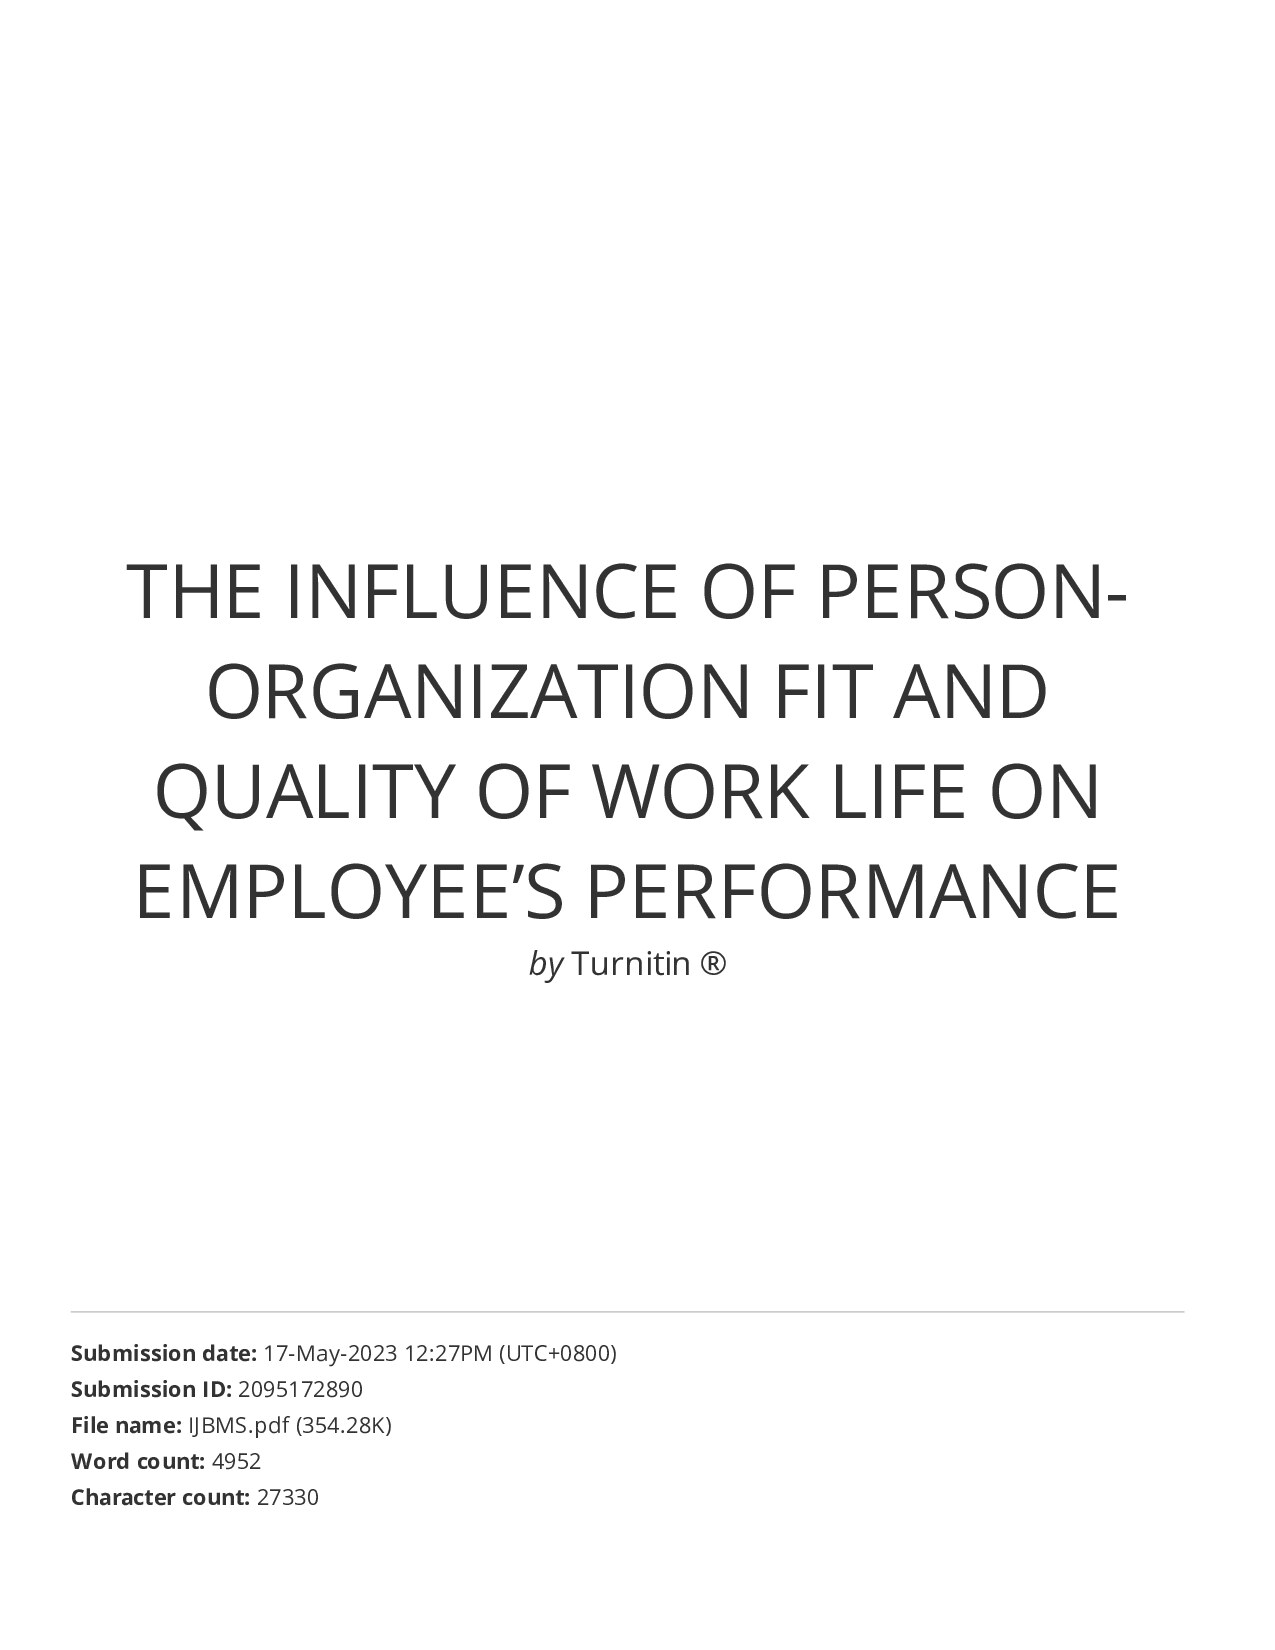 THE INFLUENCE OF PERSON-ORGANIZATION FIT AND QUALITY OF WORK LIFE ON EMPLOYEE’S PERFORMANCE (1)_compressed